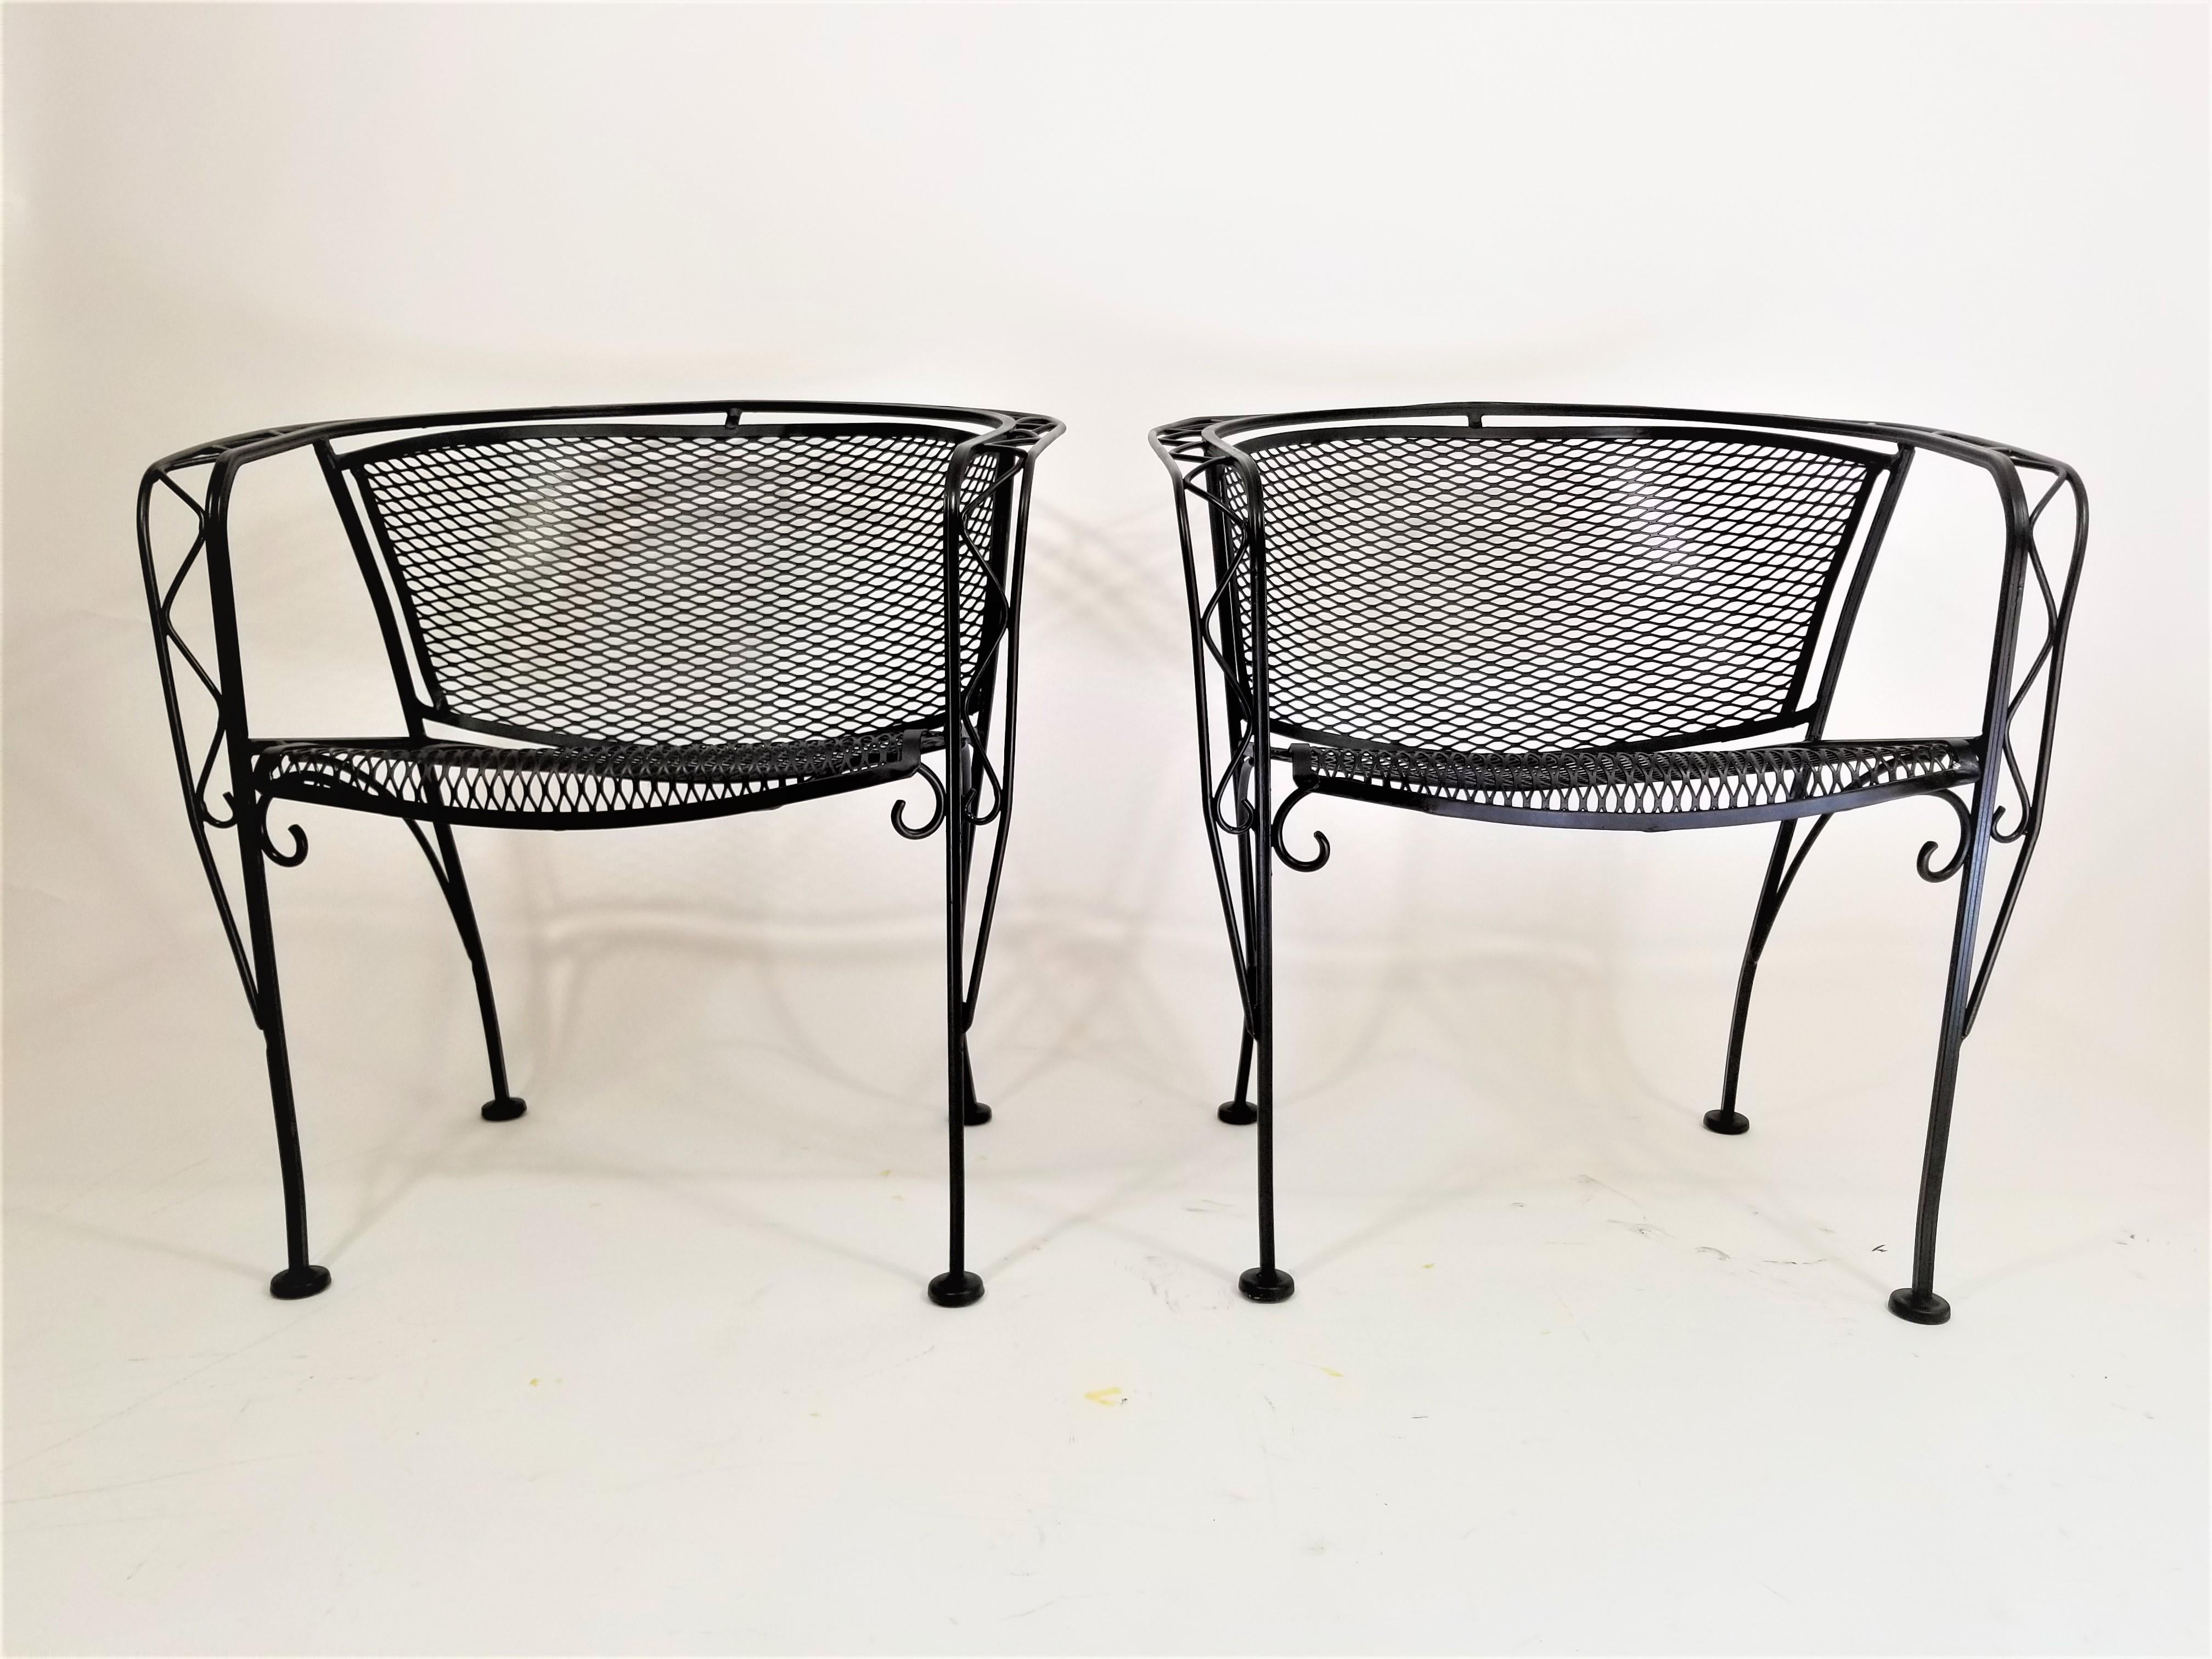 North American Salterini Midcentury Black Wrought Iron Outdoor Patio Chairs Set of 2 or 4